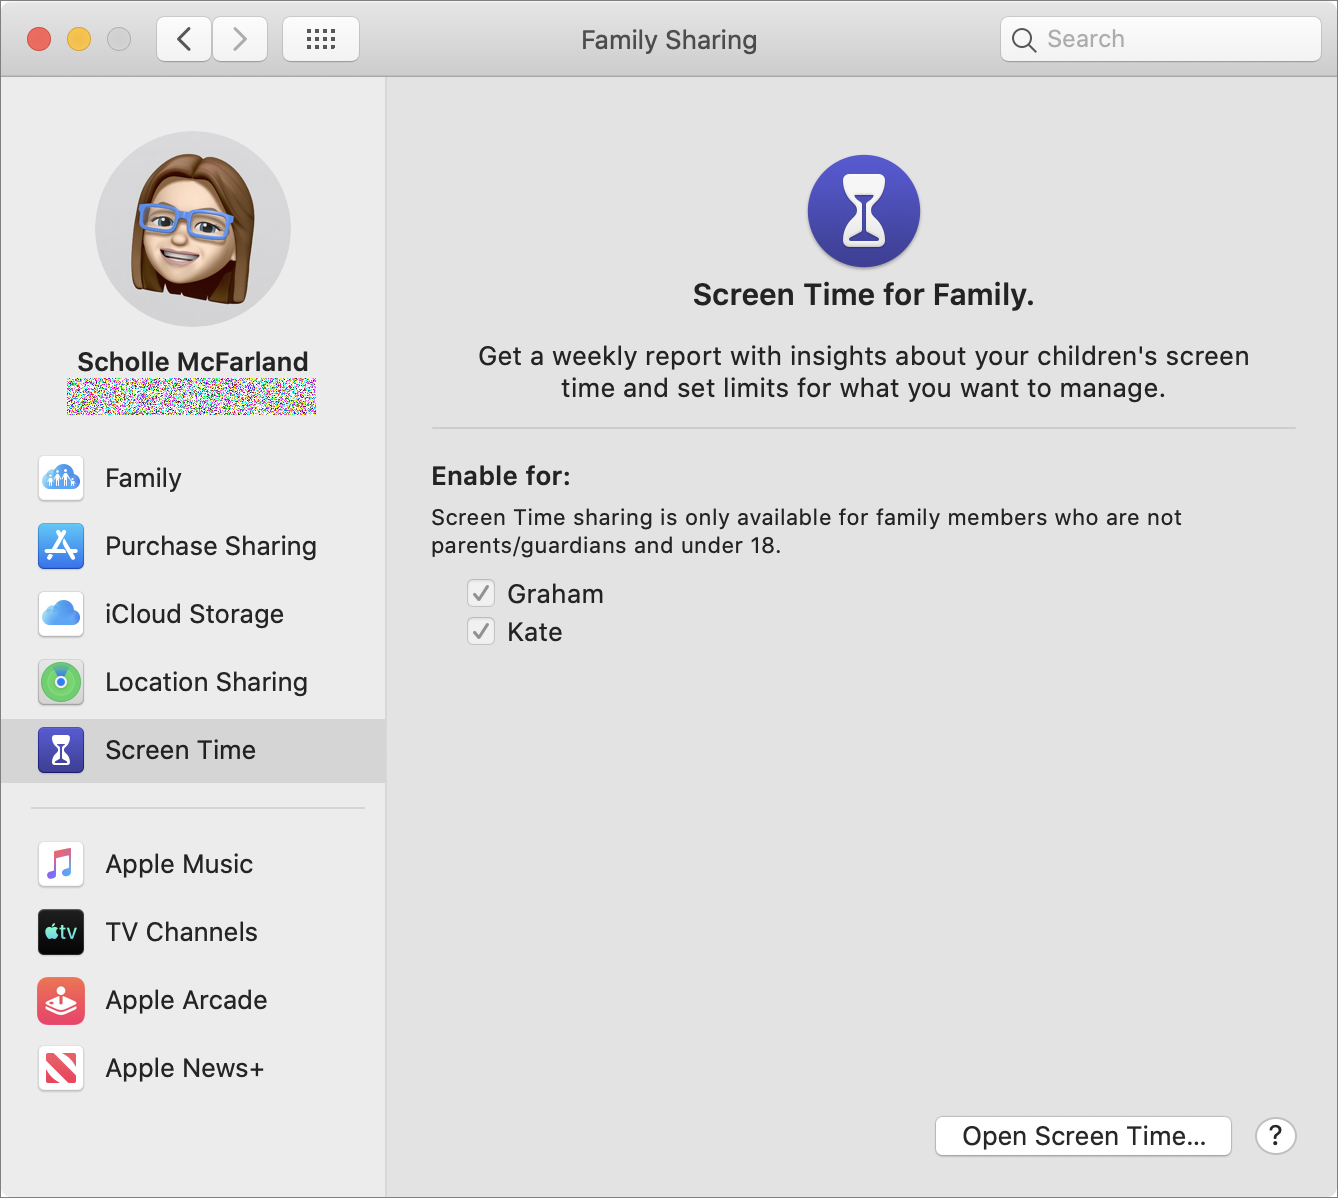 Figure 104: Select Screen Time in the sidebar to see if it’s enabled for any family members.